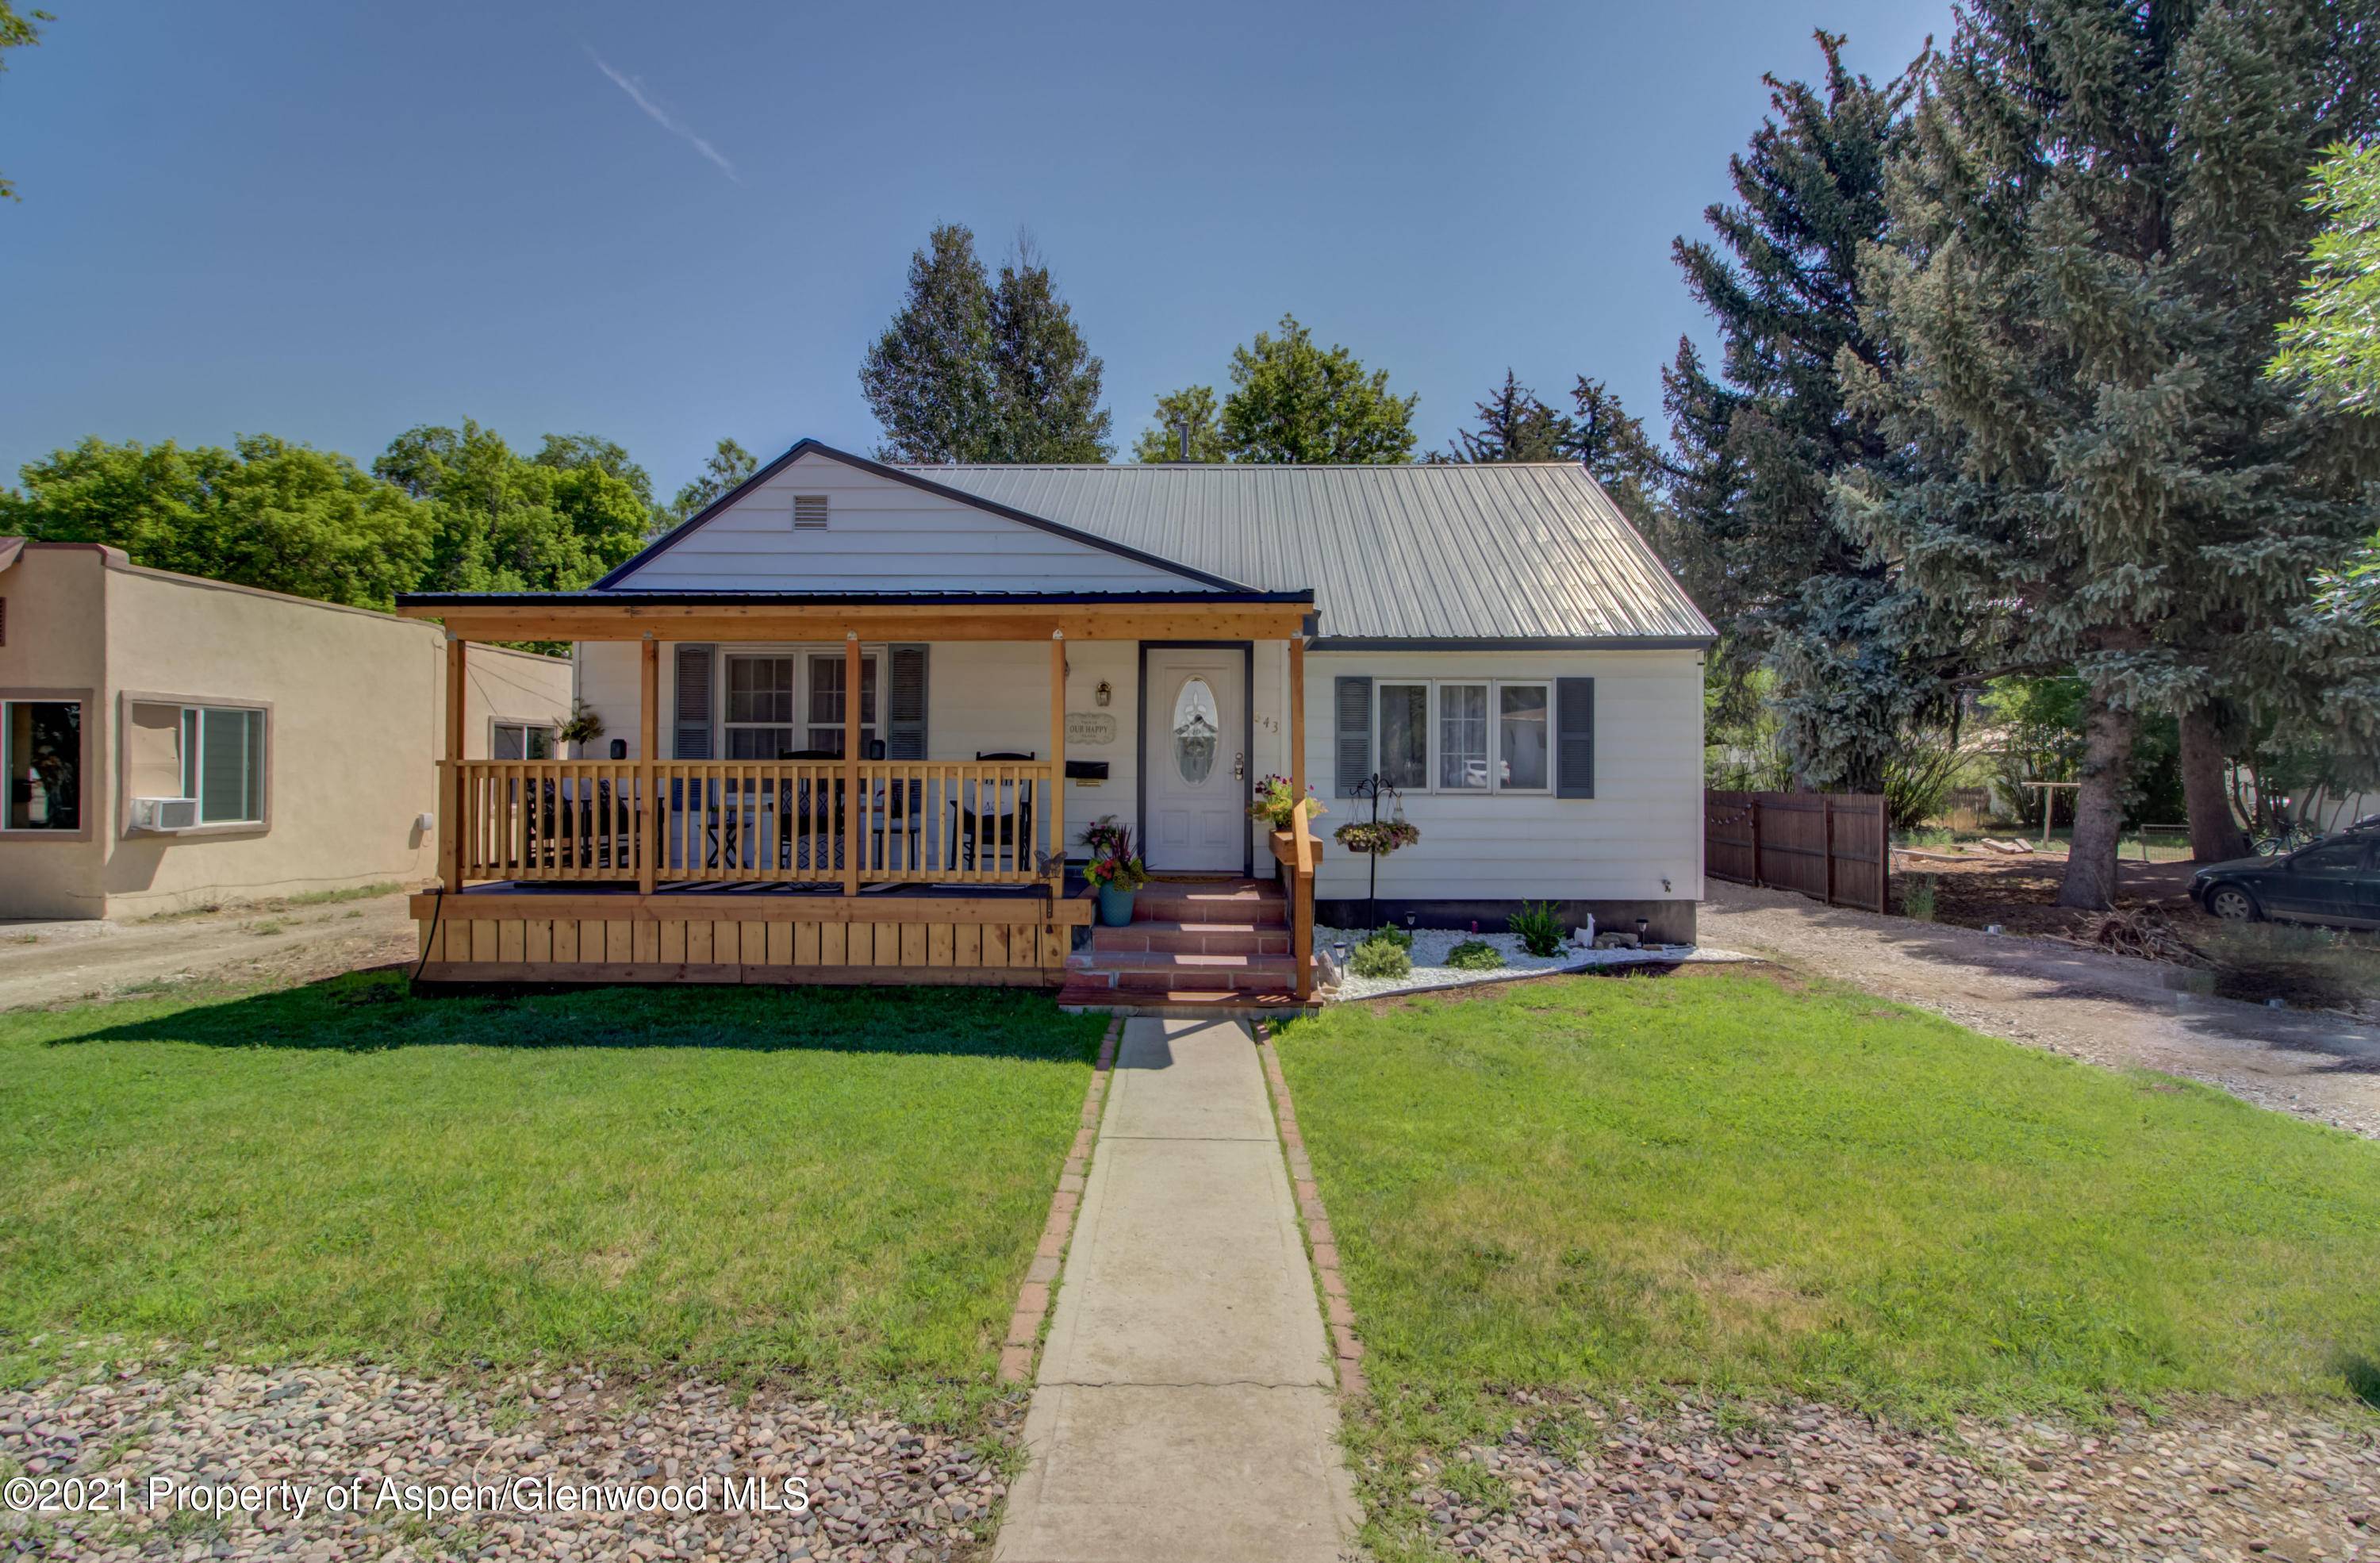 This adorable 3 Bedroom 2 bath home is waiting for you !